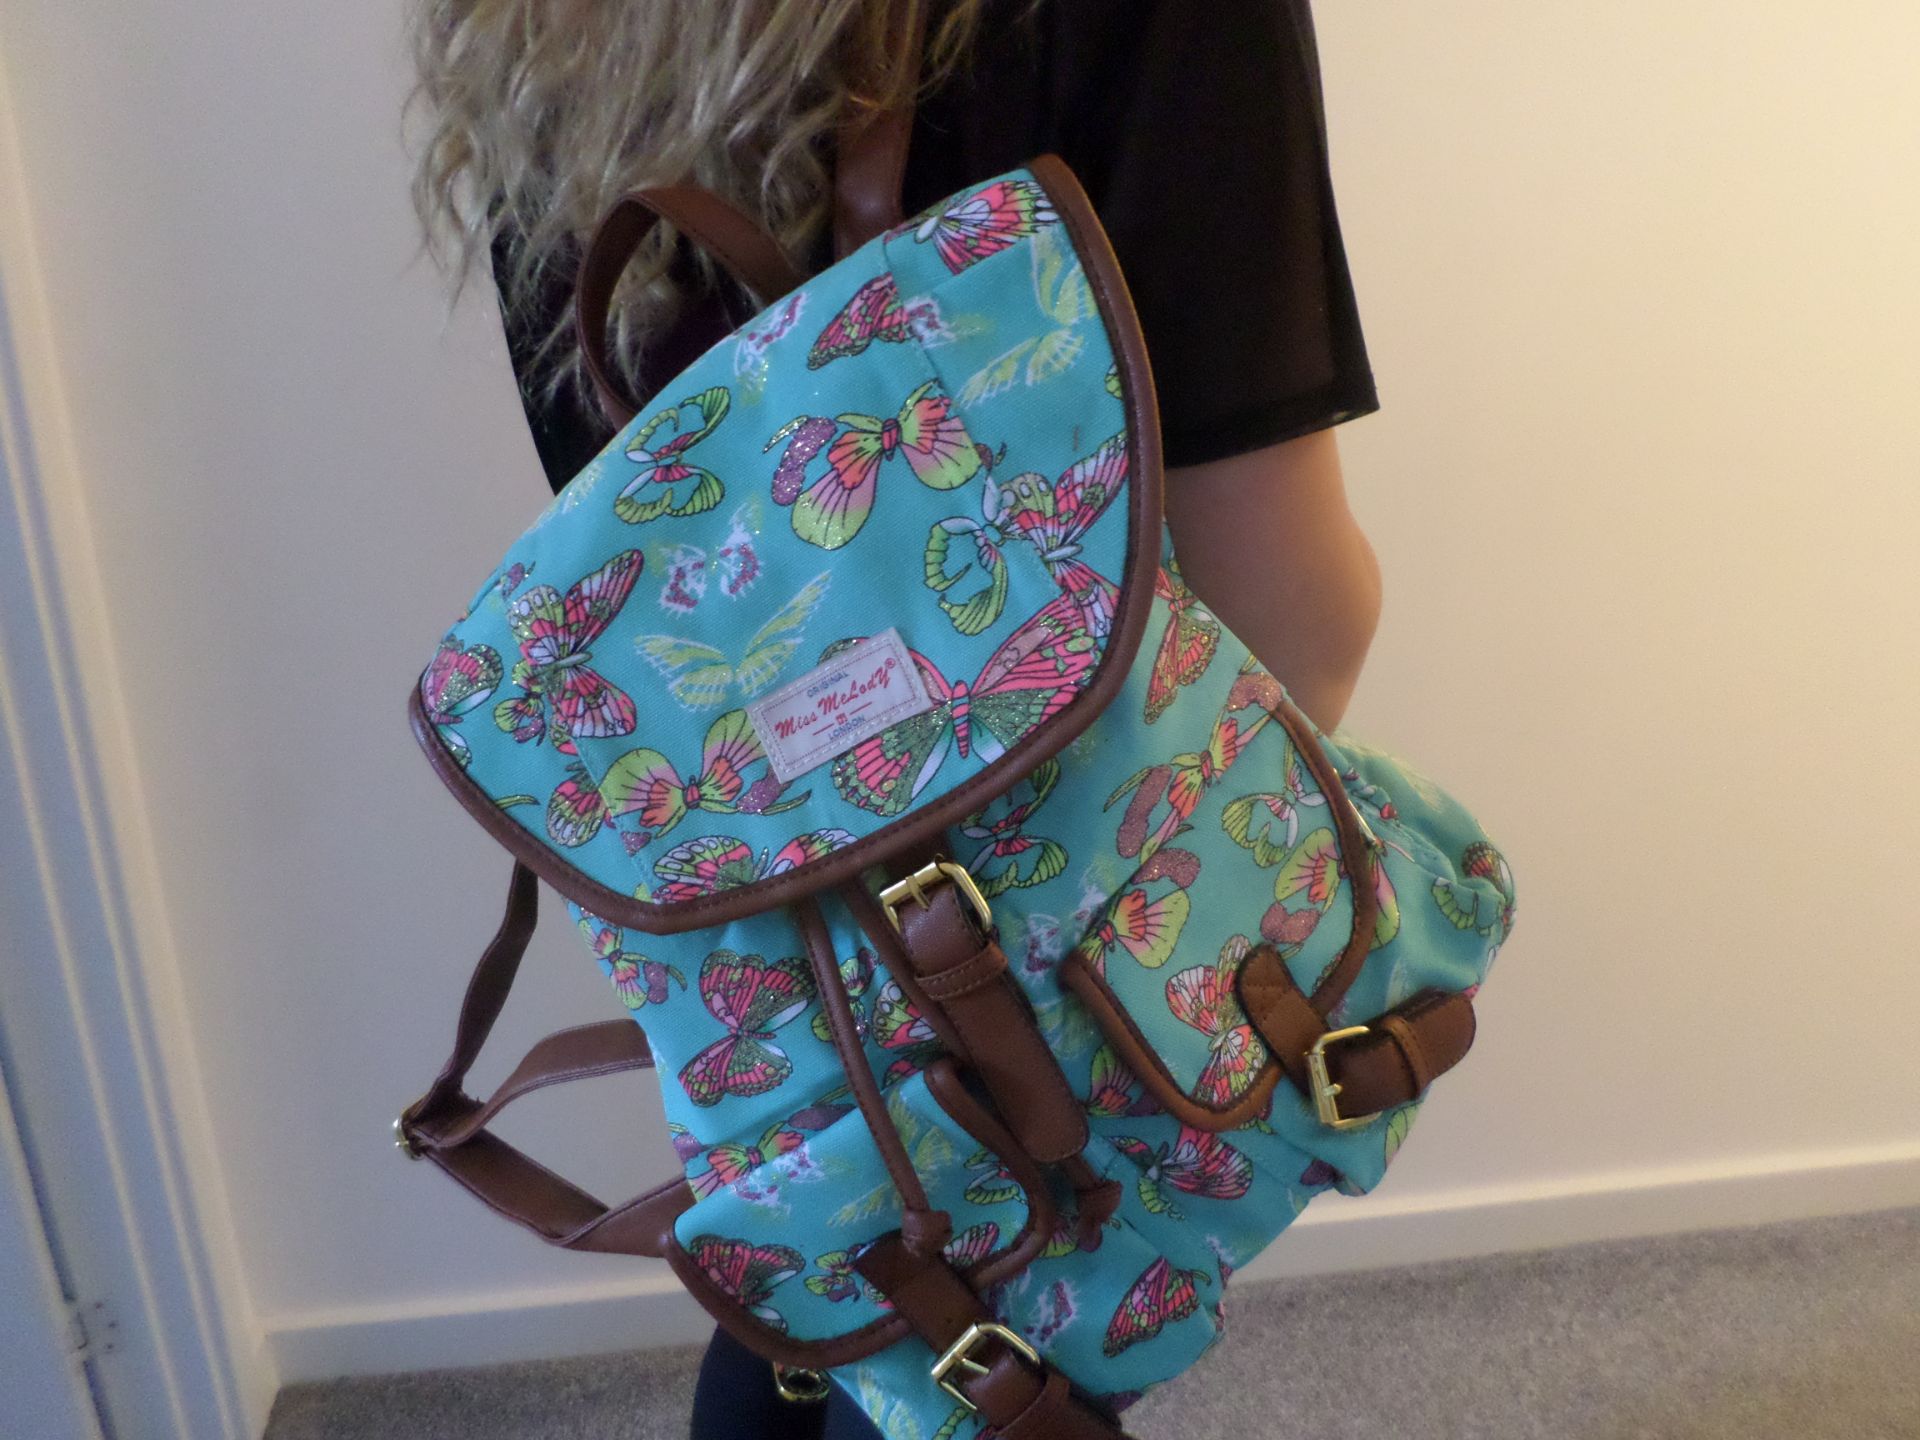 Miss Melody London Rucksack. RRP £24.99. Brand New - Image 2 of 2